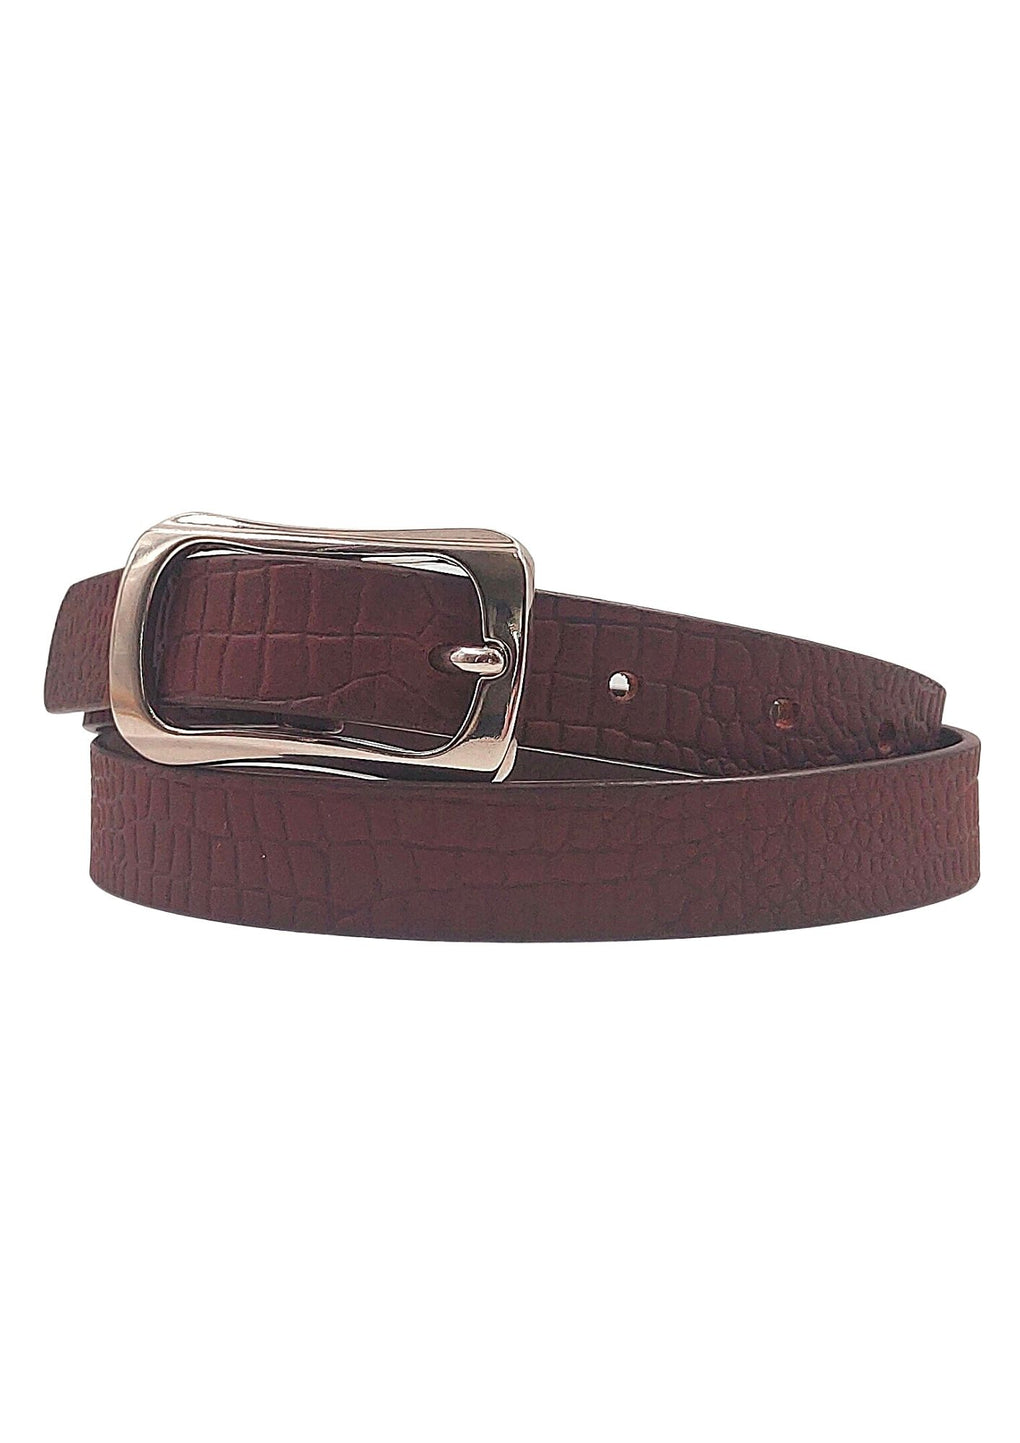 Croco Leather Belt With Silver Metallic Buckle (LB-1008_Brown)